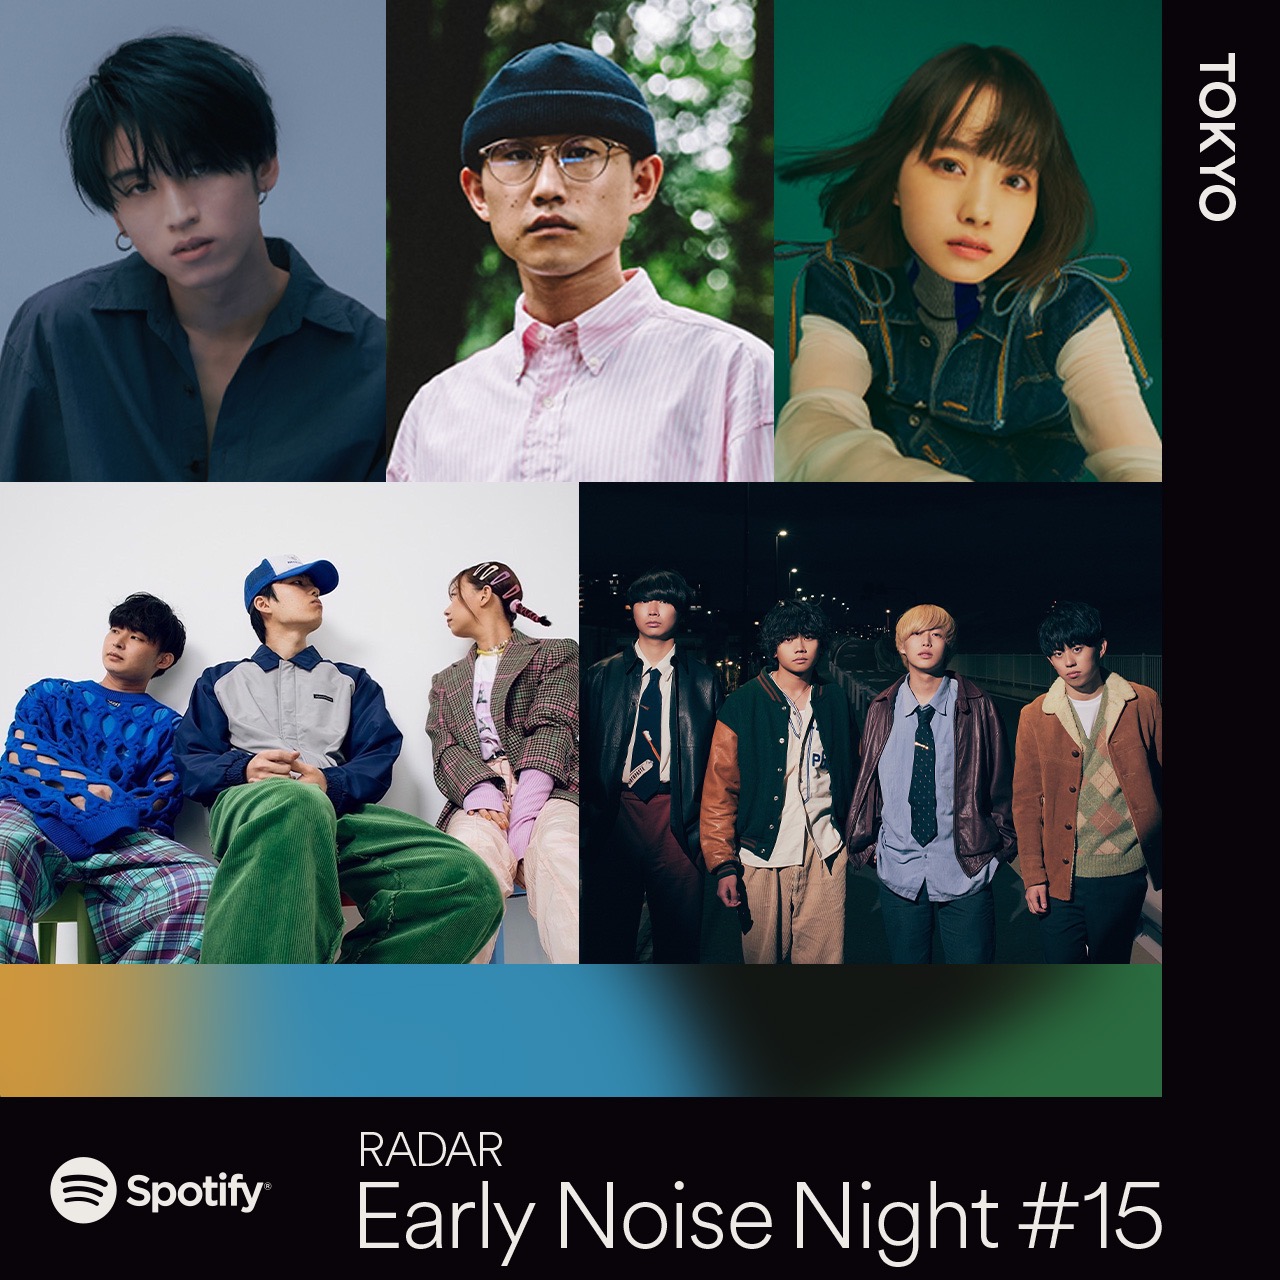 DURDN、『Spotify Early Noise Night #15』出演決定 - 画像一覧（1/2）